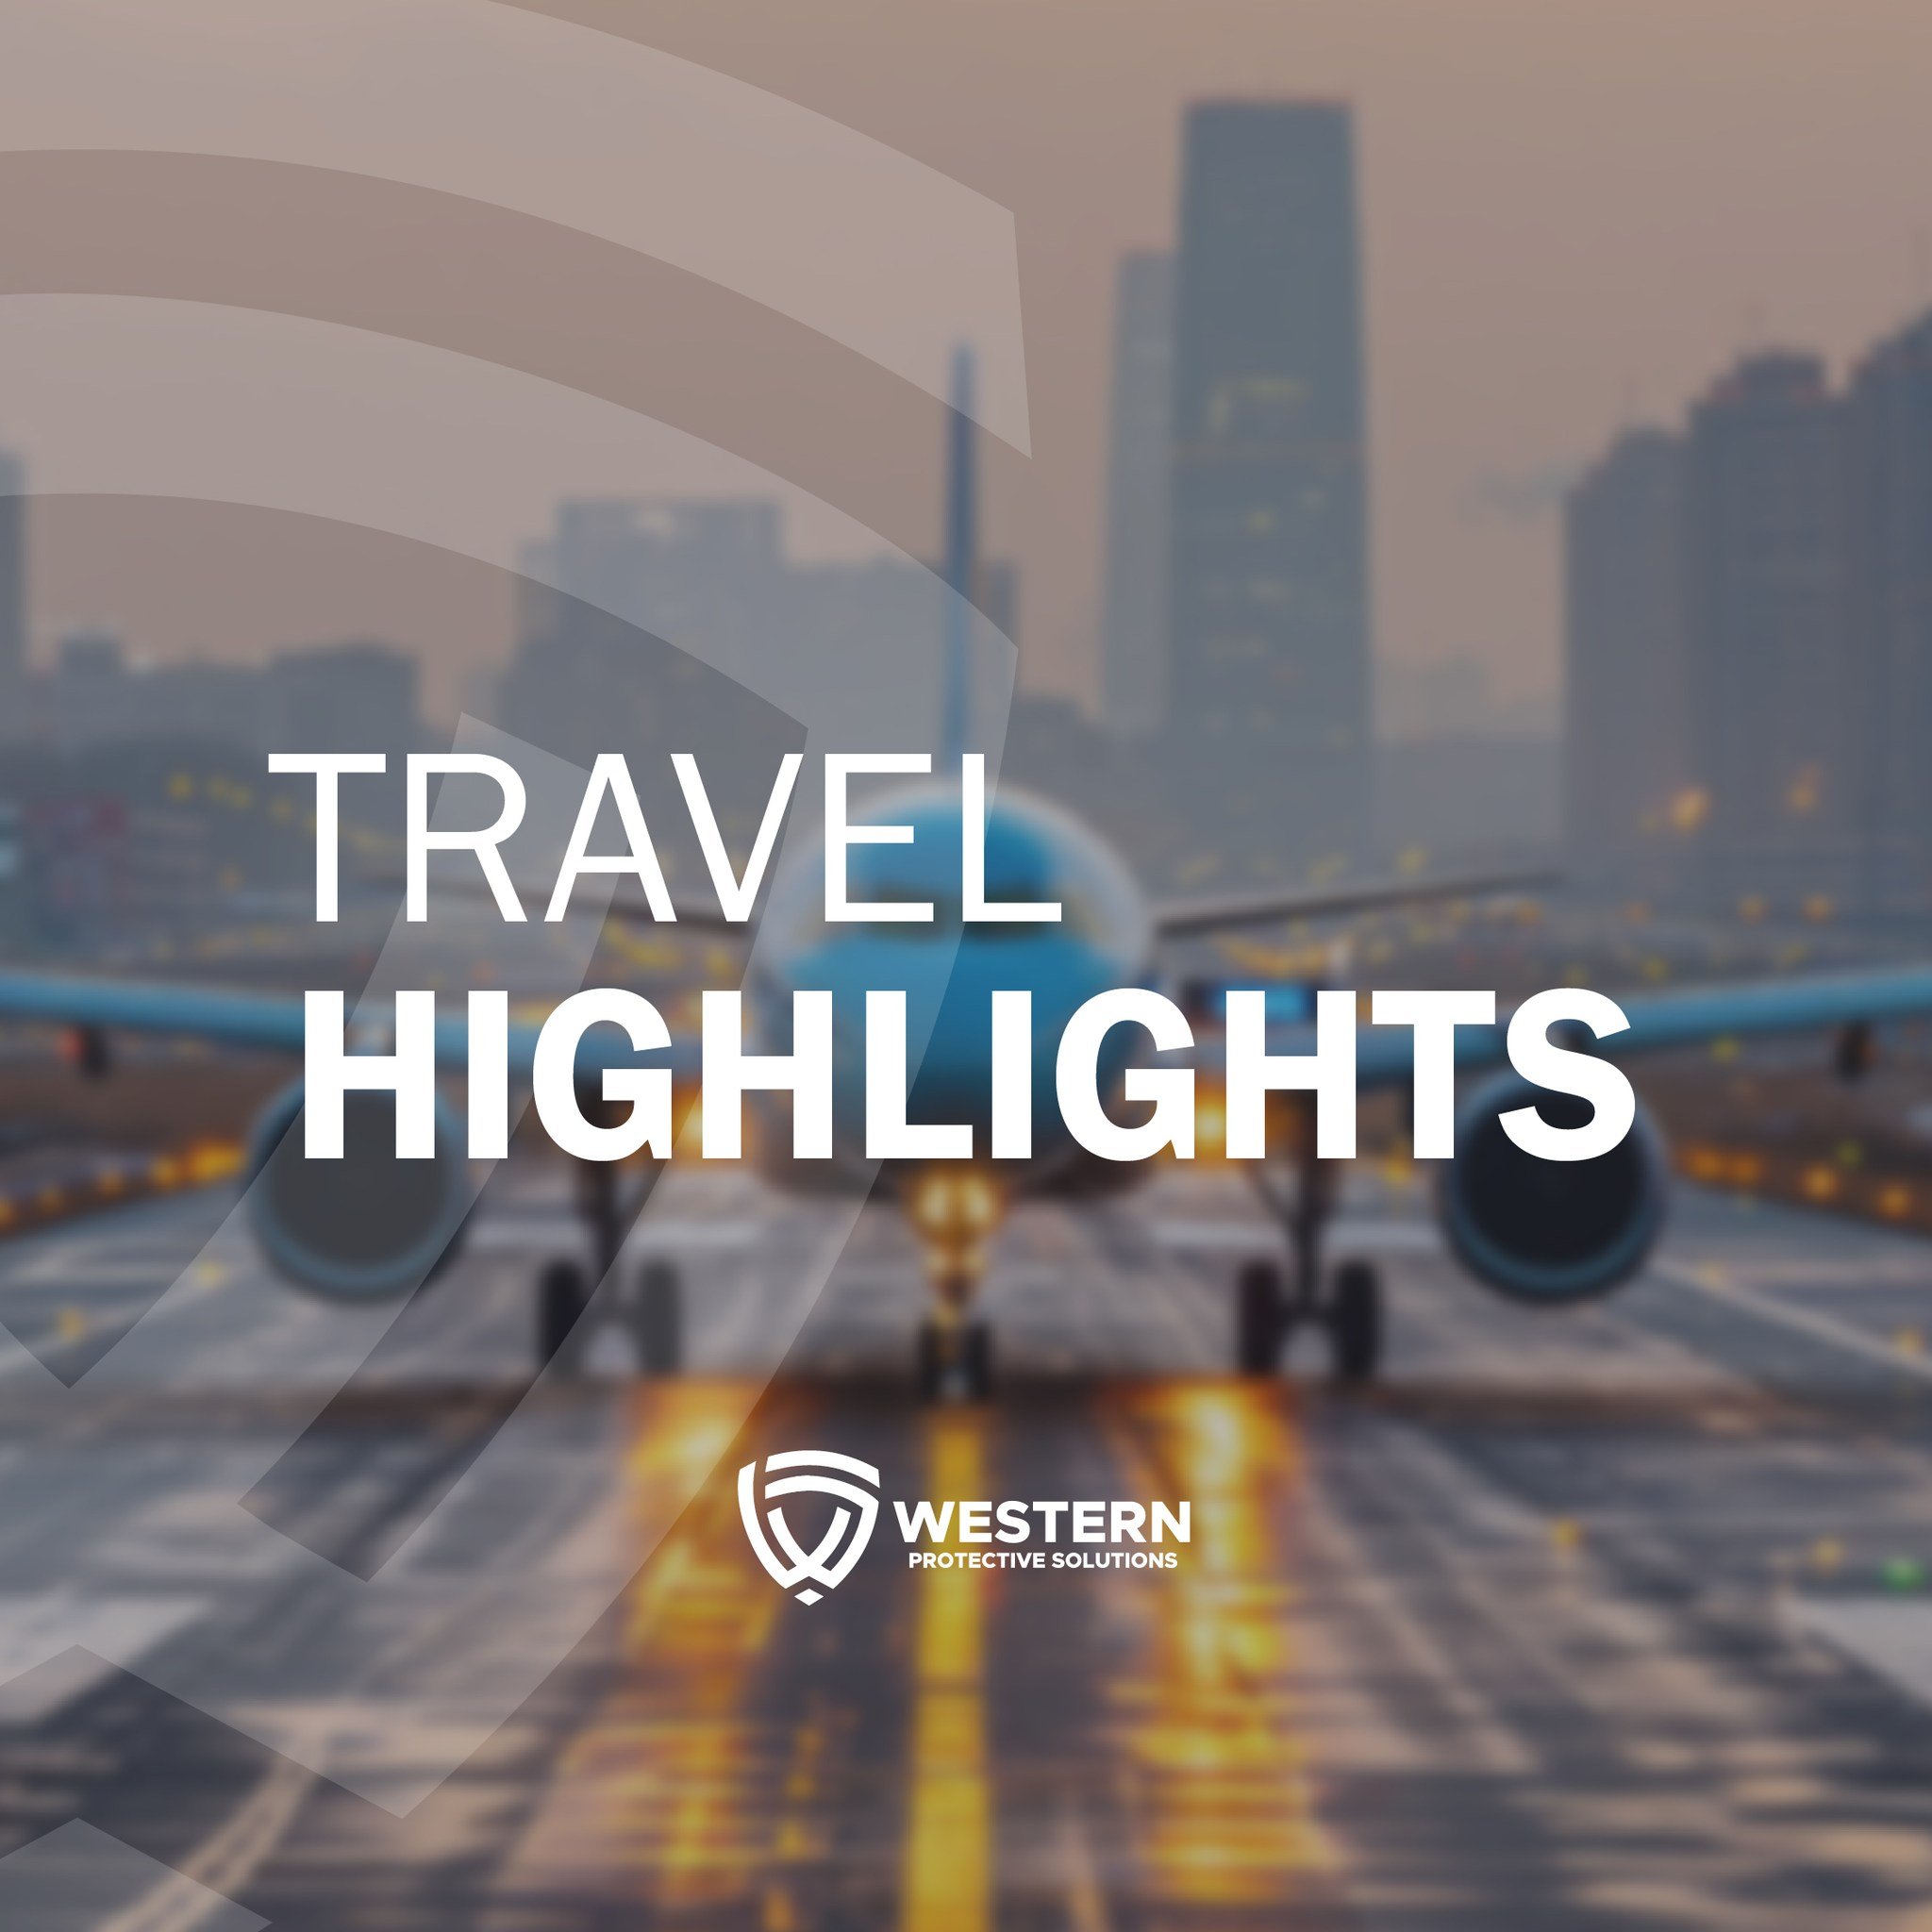 First quarter on the move! ✈️

Our team has been busy attending trade shows, visiting customers, and delivering top-notch trainings across the globe.

Stay tuned for insights from these experiences and how we're helping our end users stay safe!

#Wes